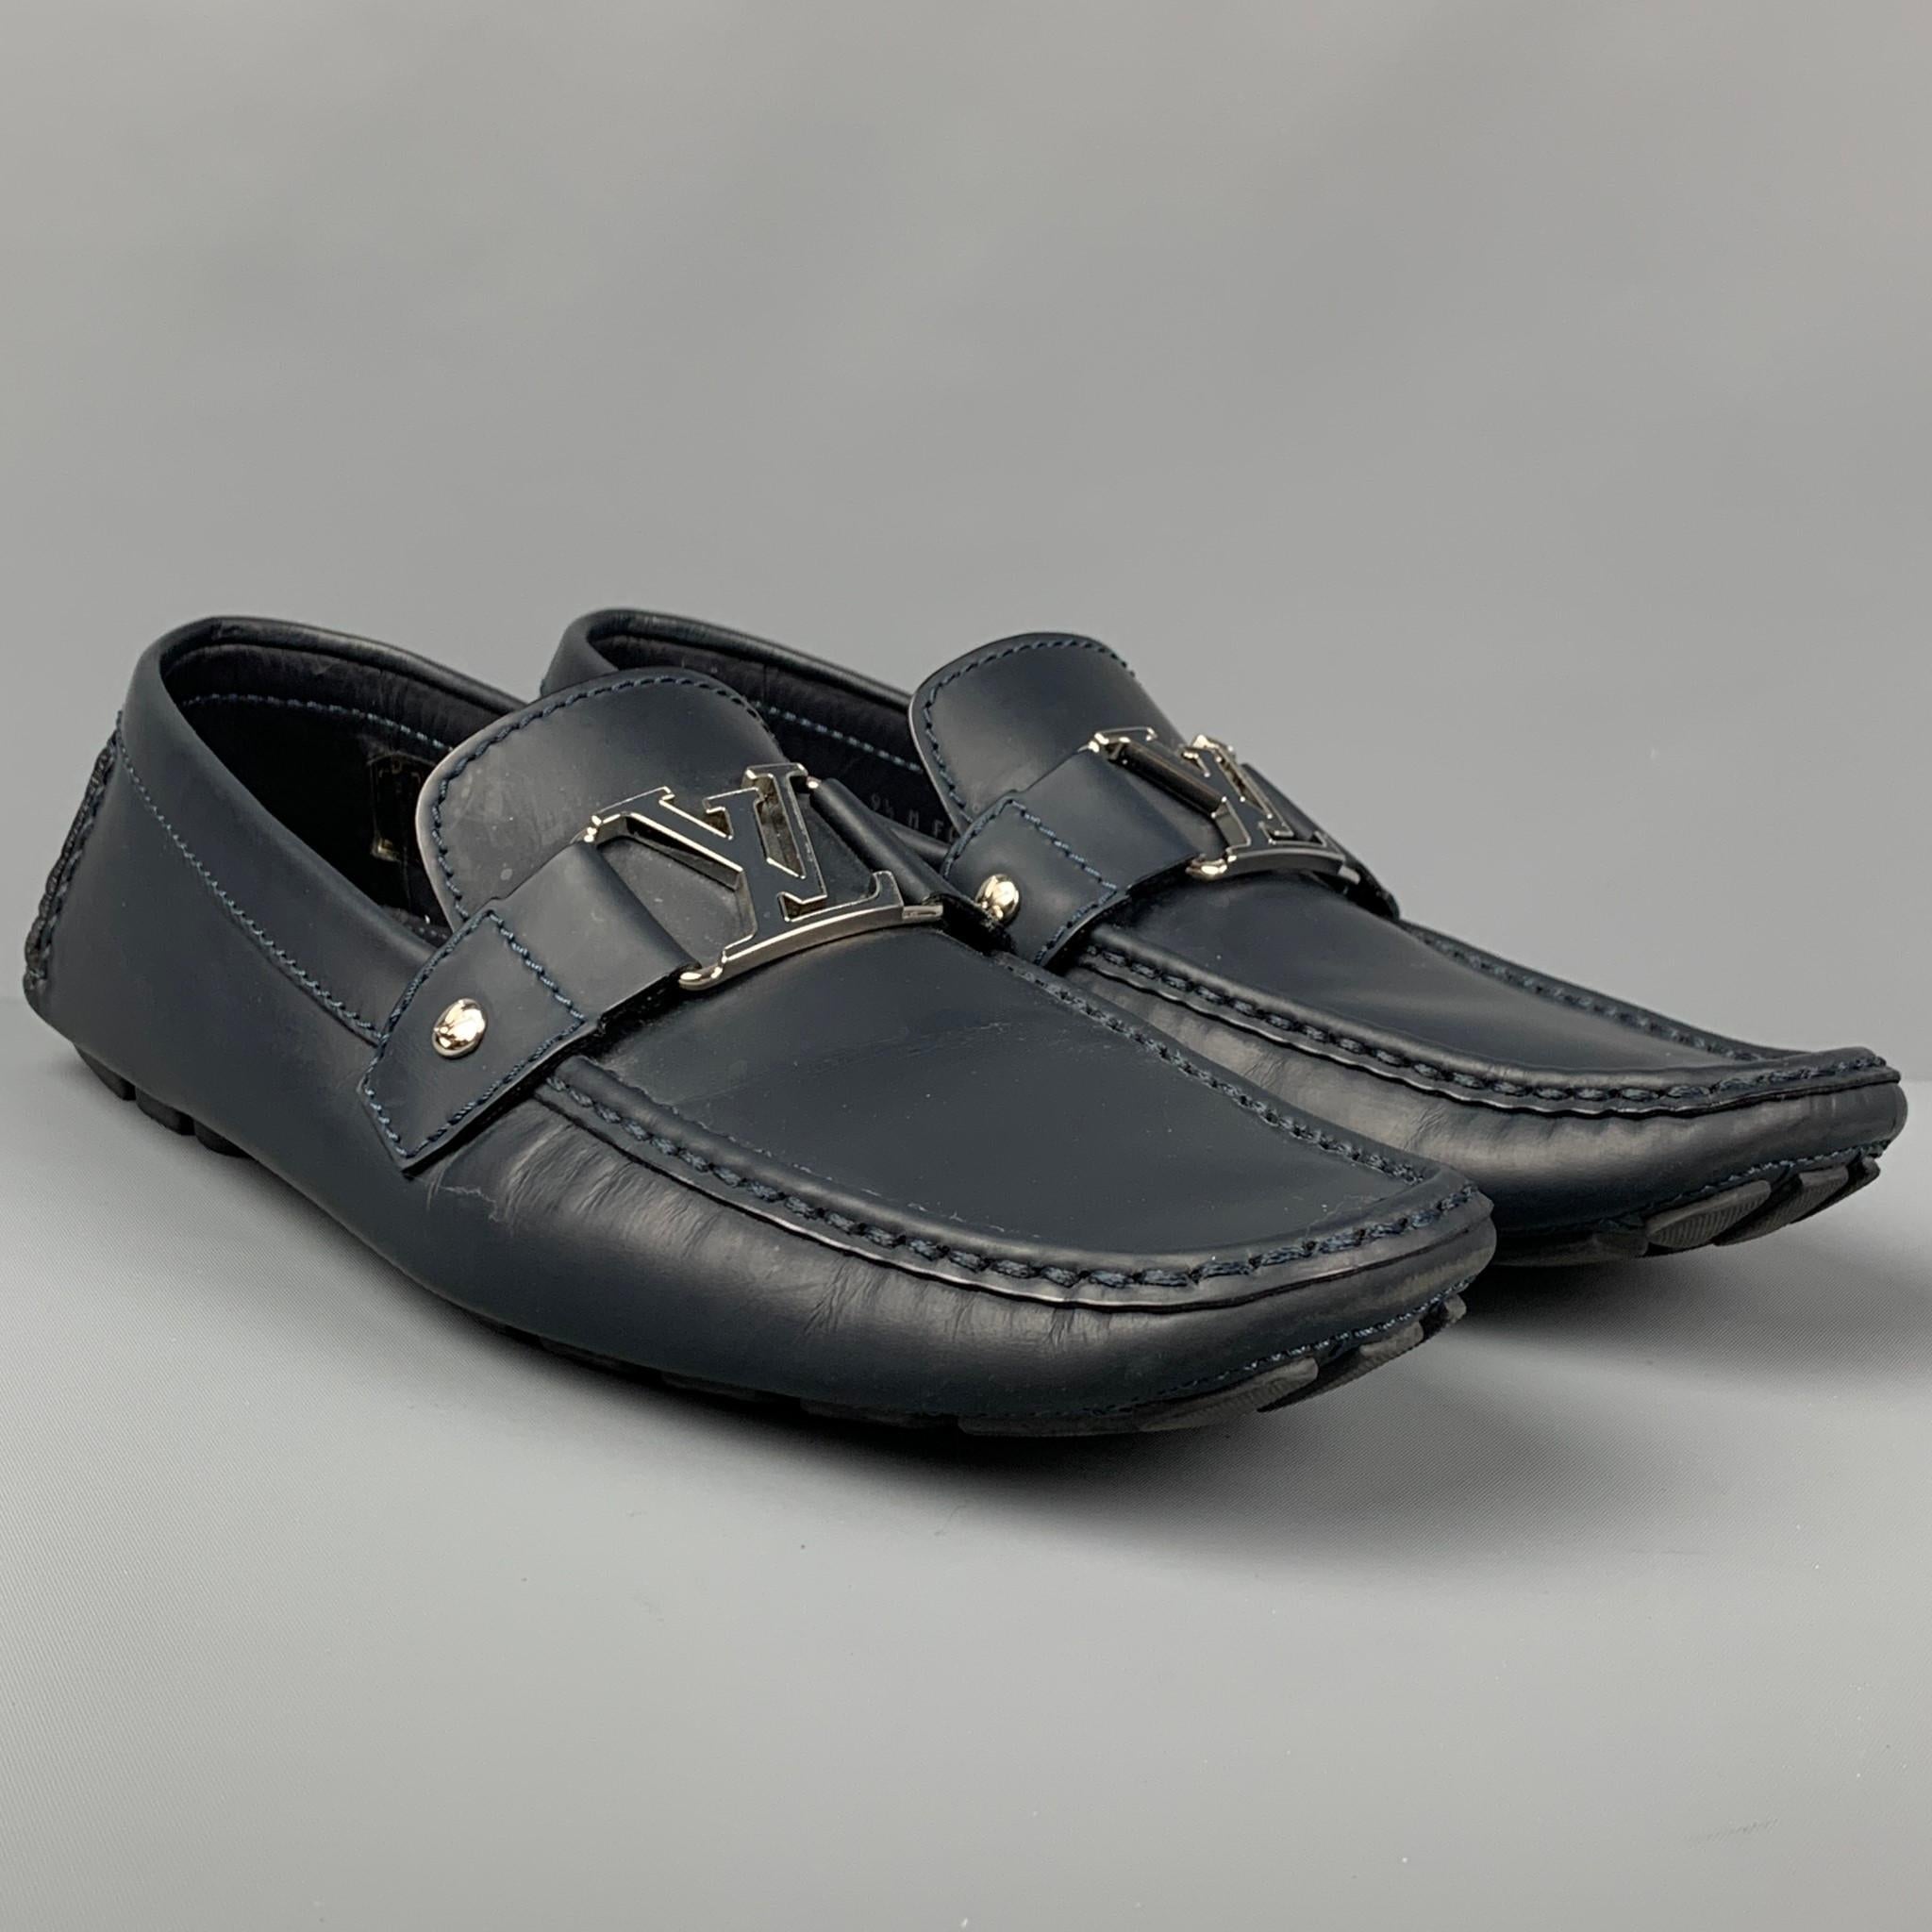 Louis Vuitton Leather Drivers - Blue Loafers, Shoes - LOU816262